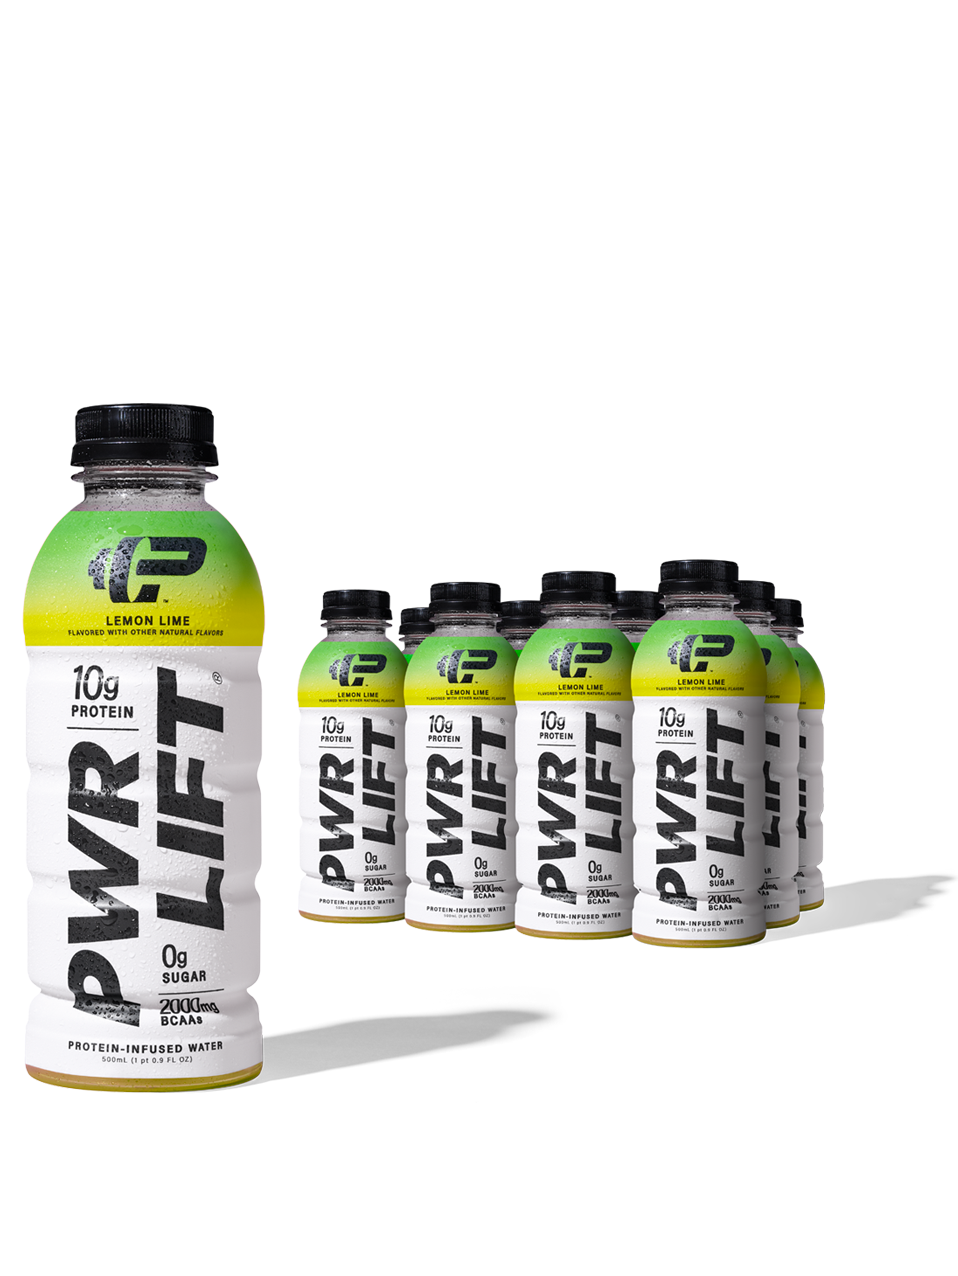 A bottle of PWR LIFT Lemon Lime in the forefront with rows of the same in the background